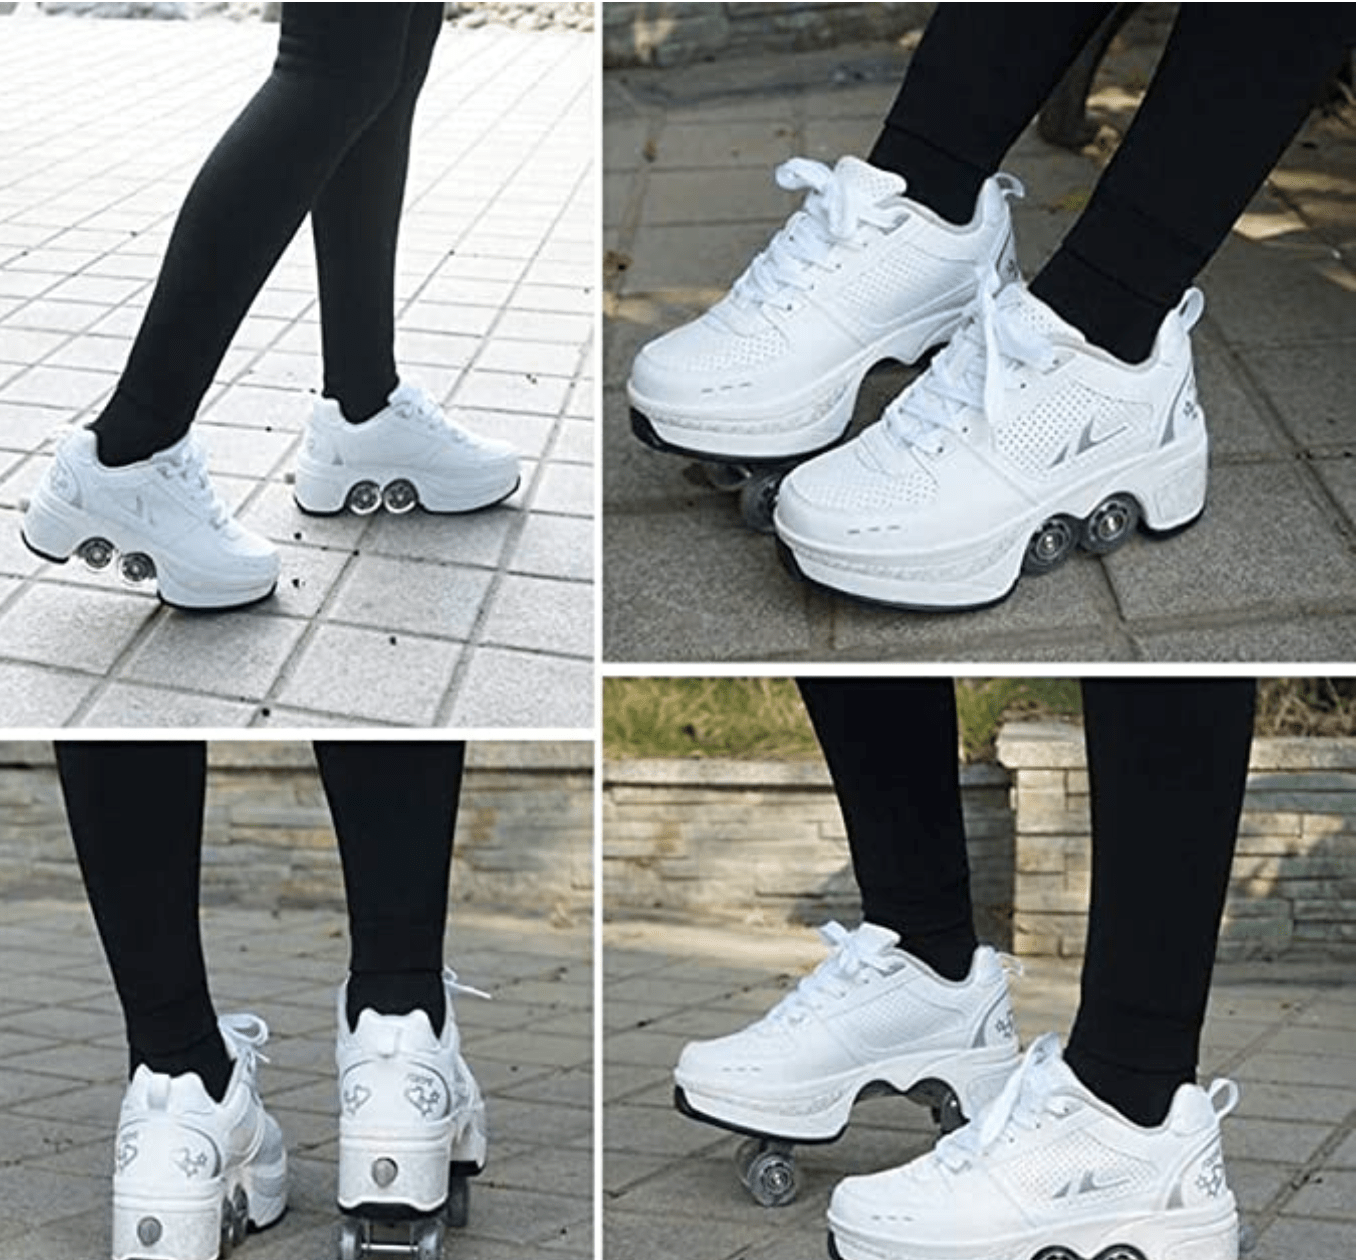 Deformation Roller shoe Male/ Female Skating Shoes Automatic Walking Shoes Invisible Pulley Shoes Skates with Double-Row Deform Wheel